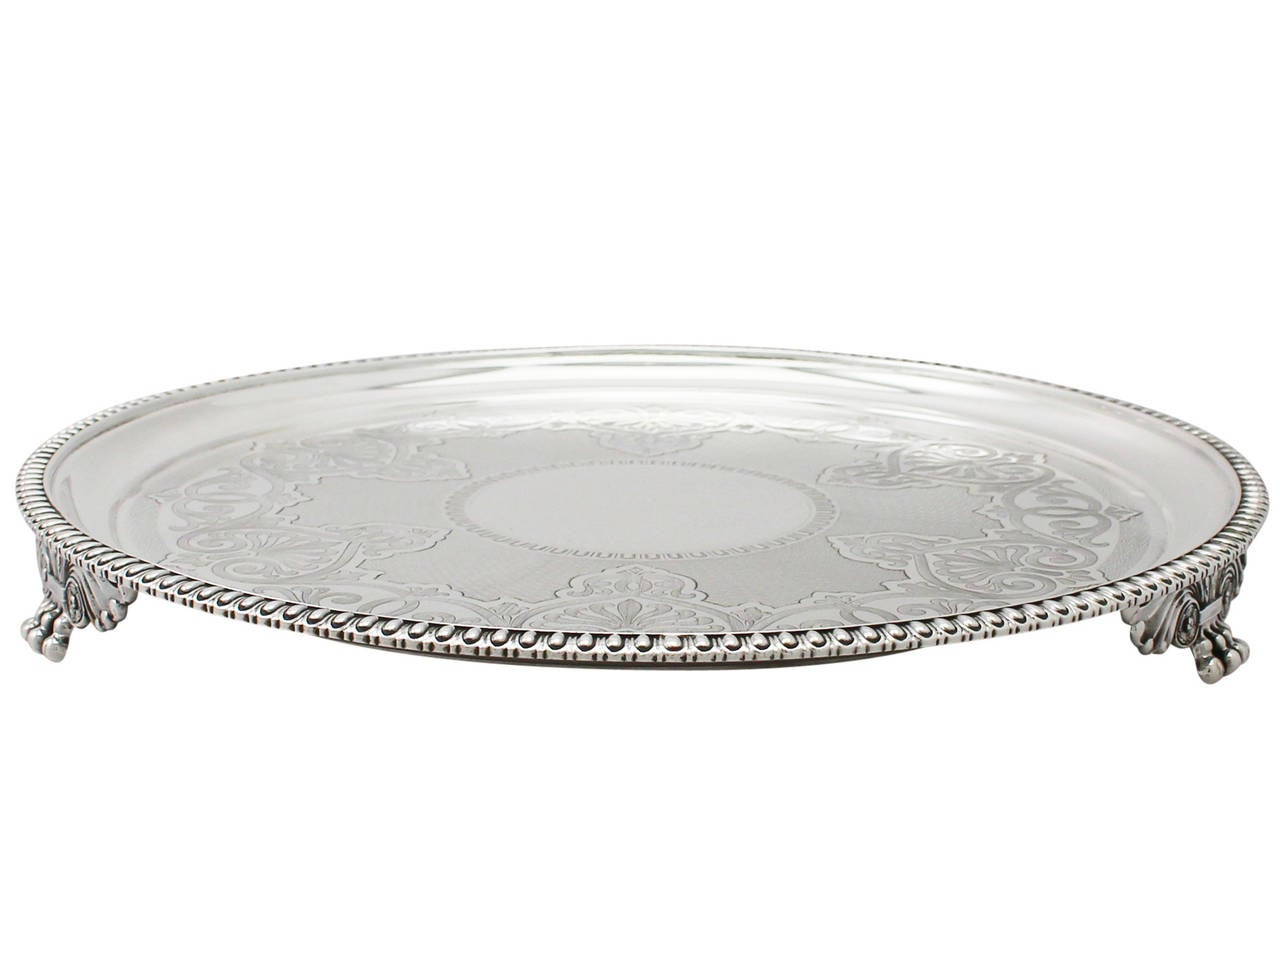 An exceptional, fine and impressive antique Victorian English sterling silver salver made by Barnard & Sons Ltd; an addition to our ornamental silverware collection.

This exceptional antique Victorian sterling silver salver has a plain circular